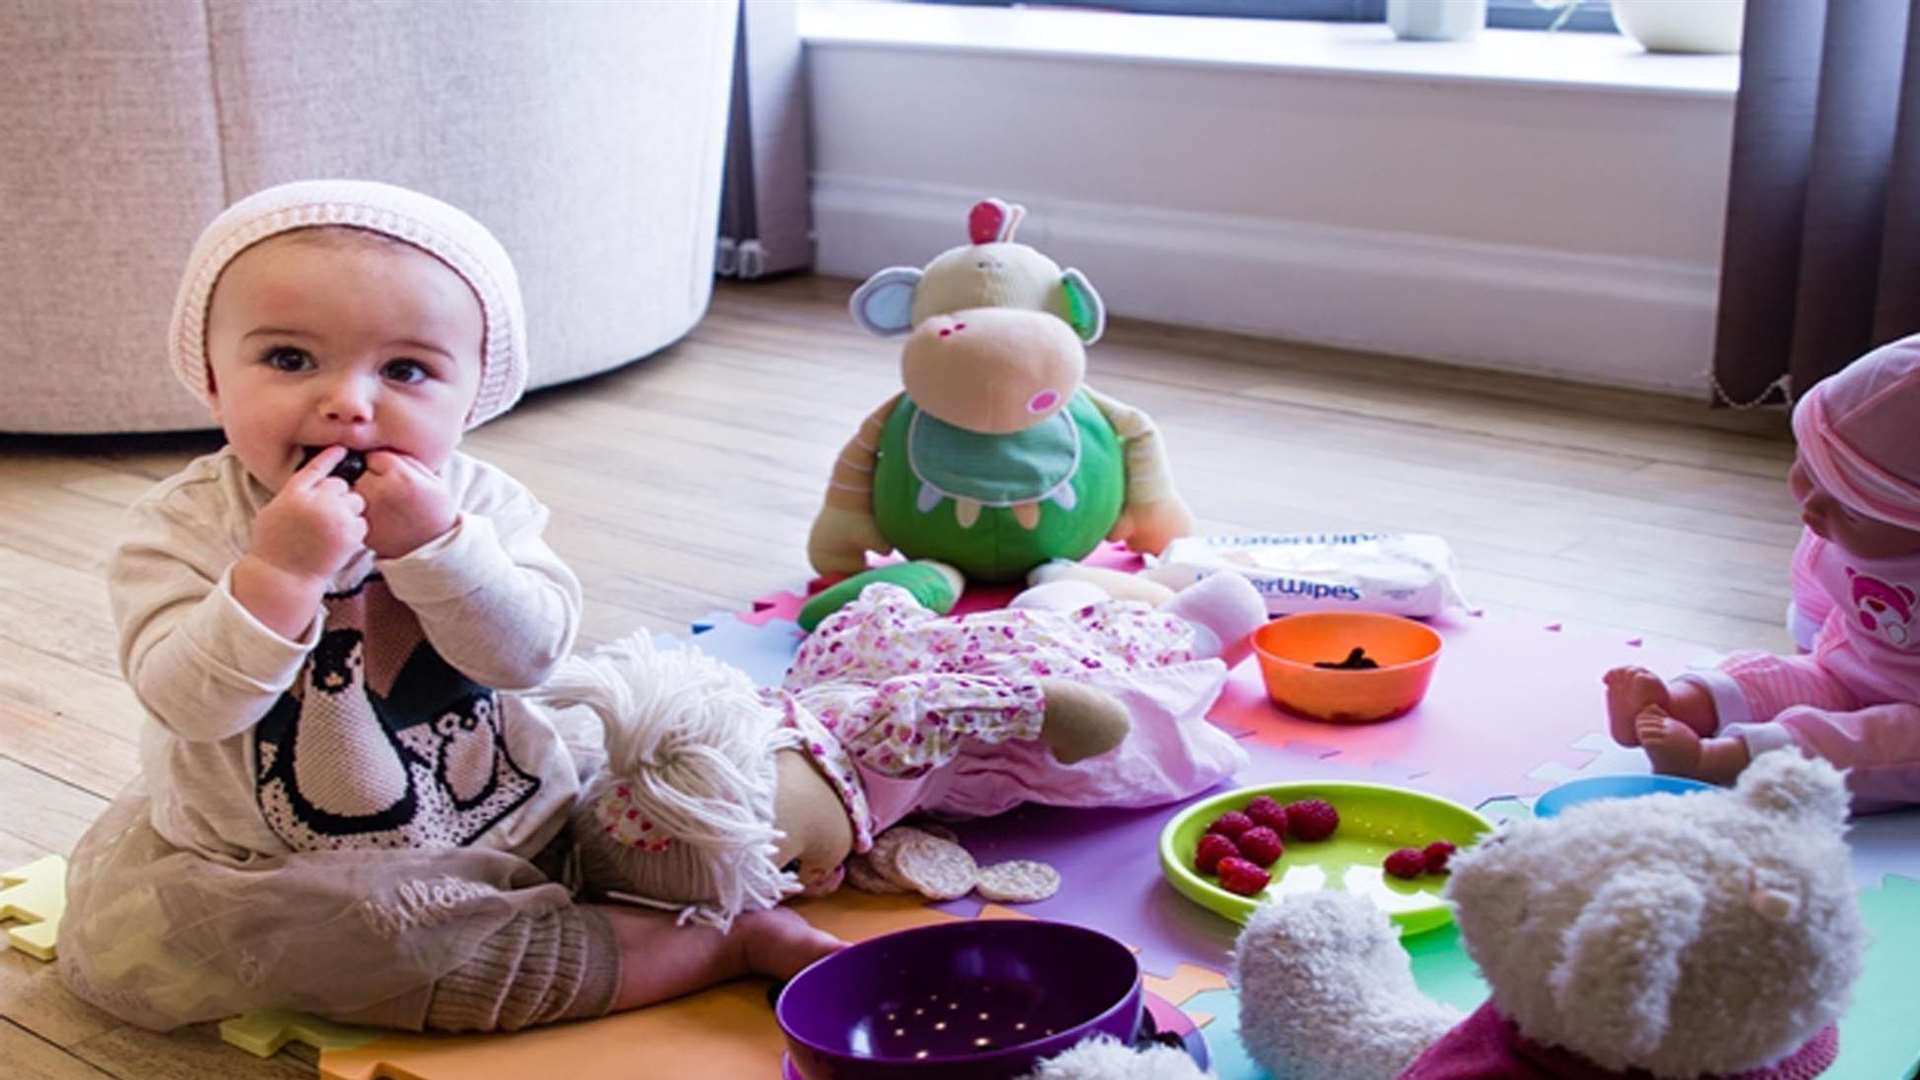 Babies who haven't had sensory food play experiences are more likely to be fussy eaters